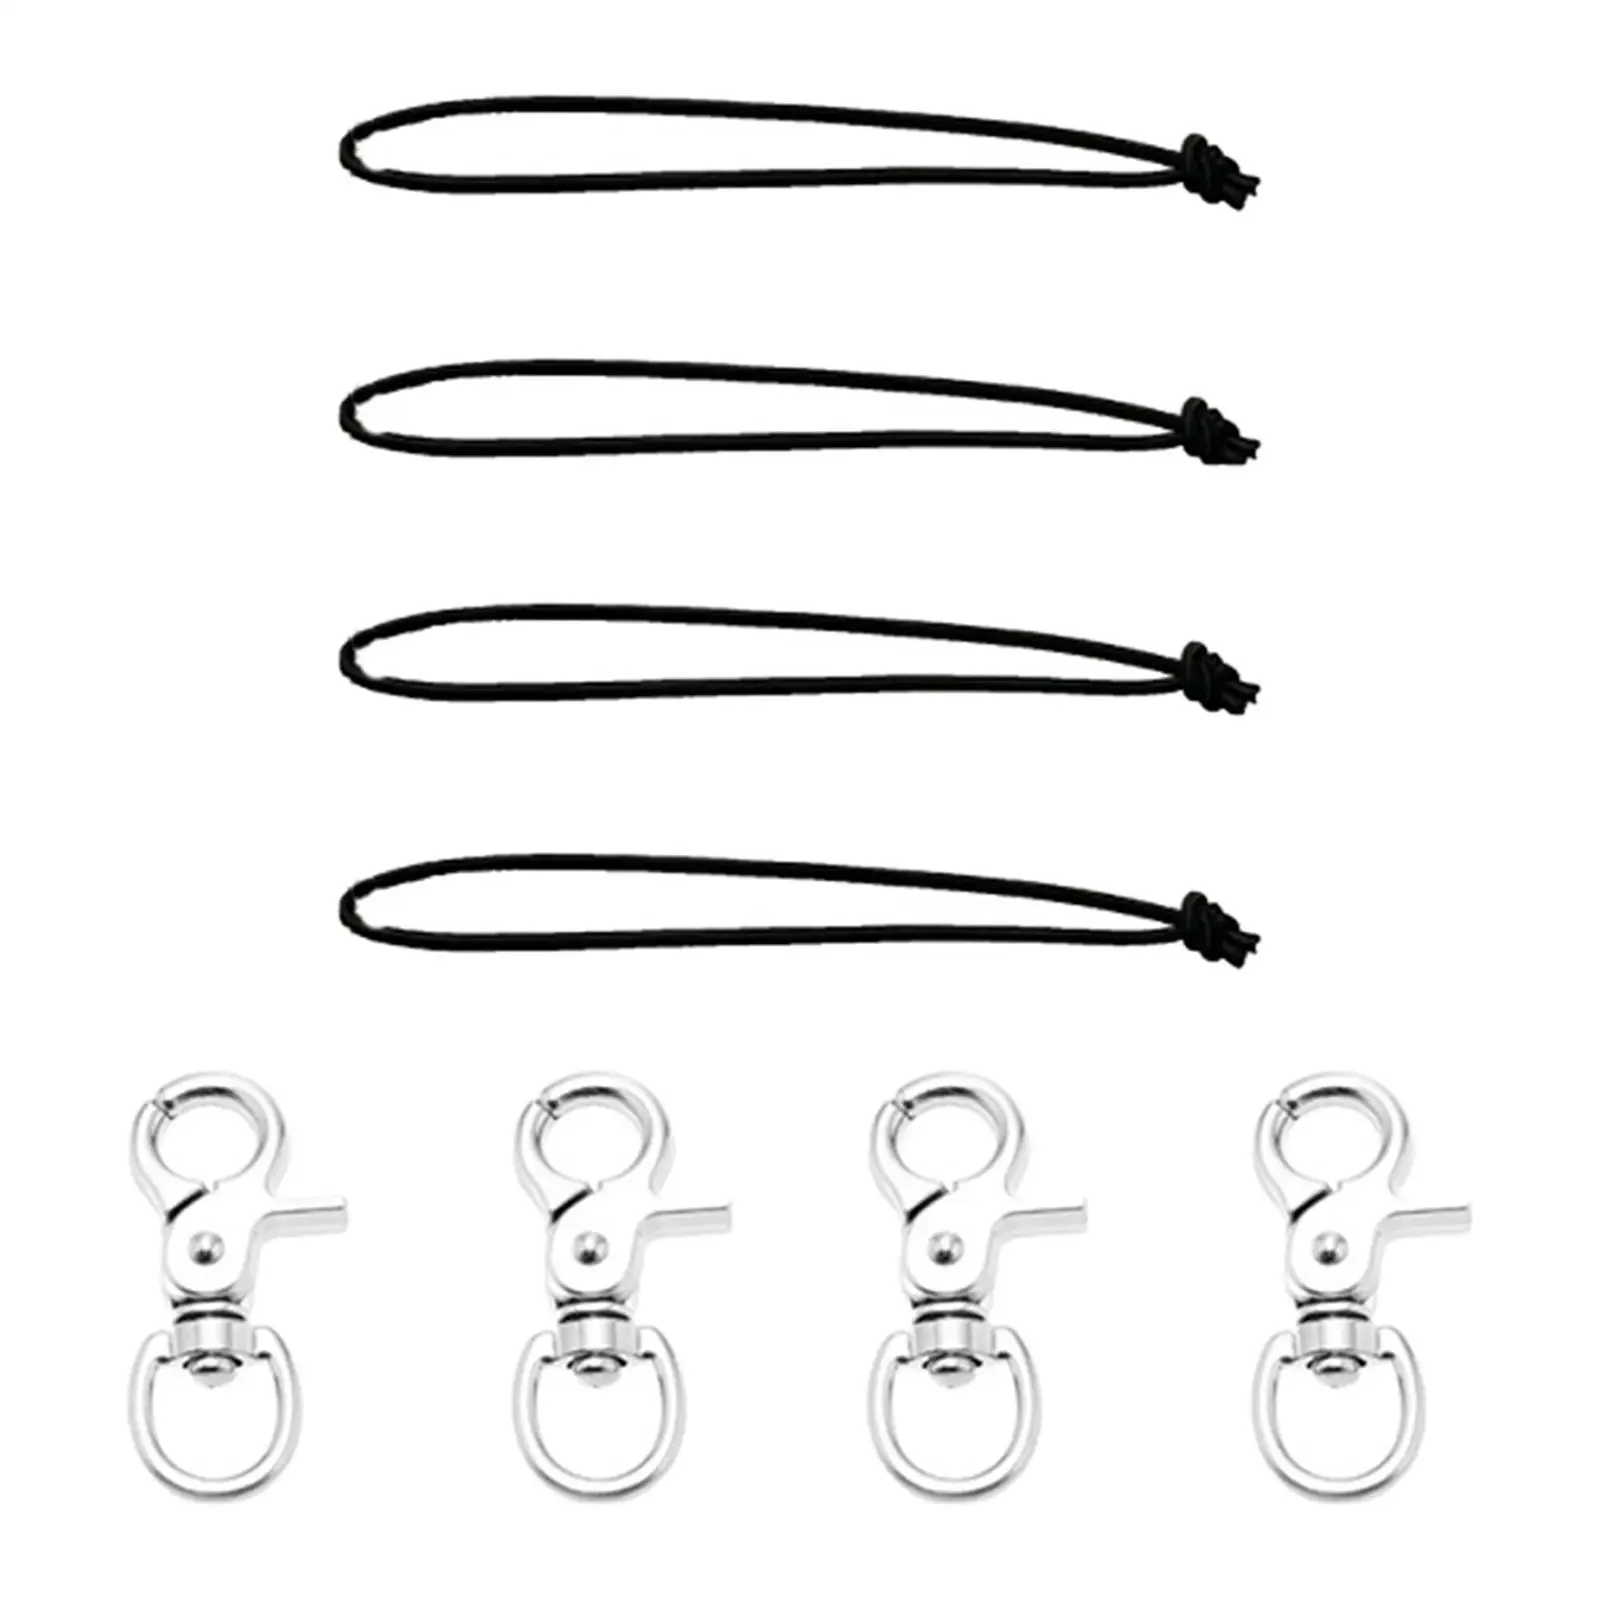 4 Pieces Skiing Snowboard Leash Cord Professional Survival Camping Strong